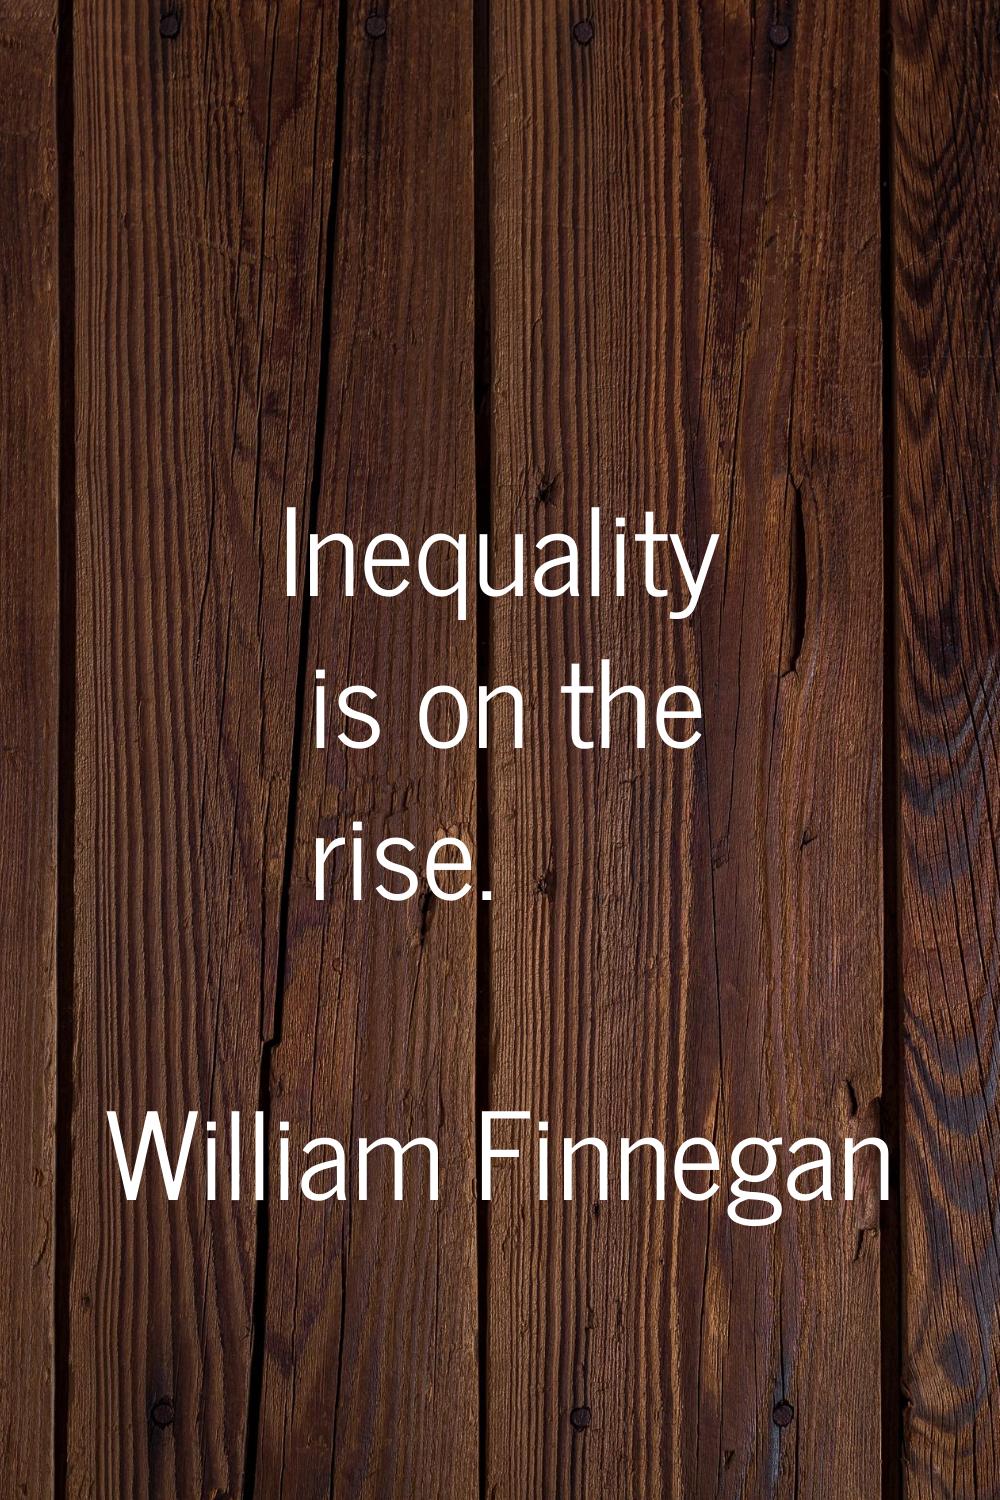 Inequality is on the rise.